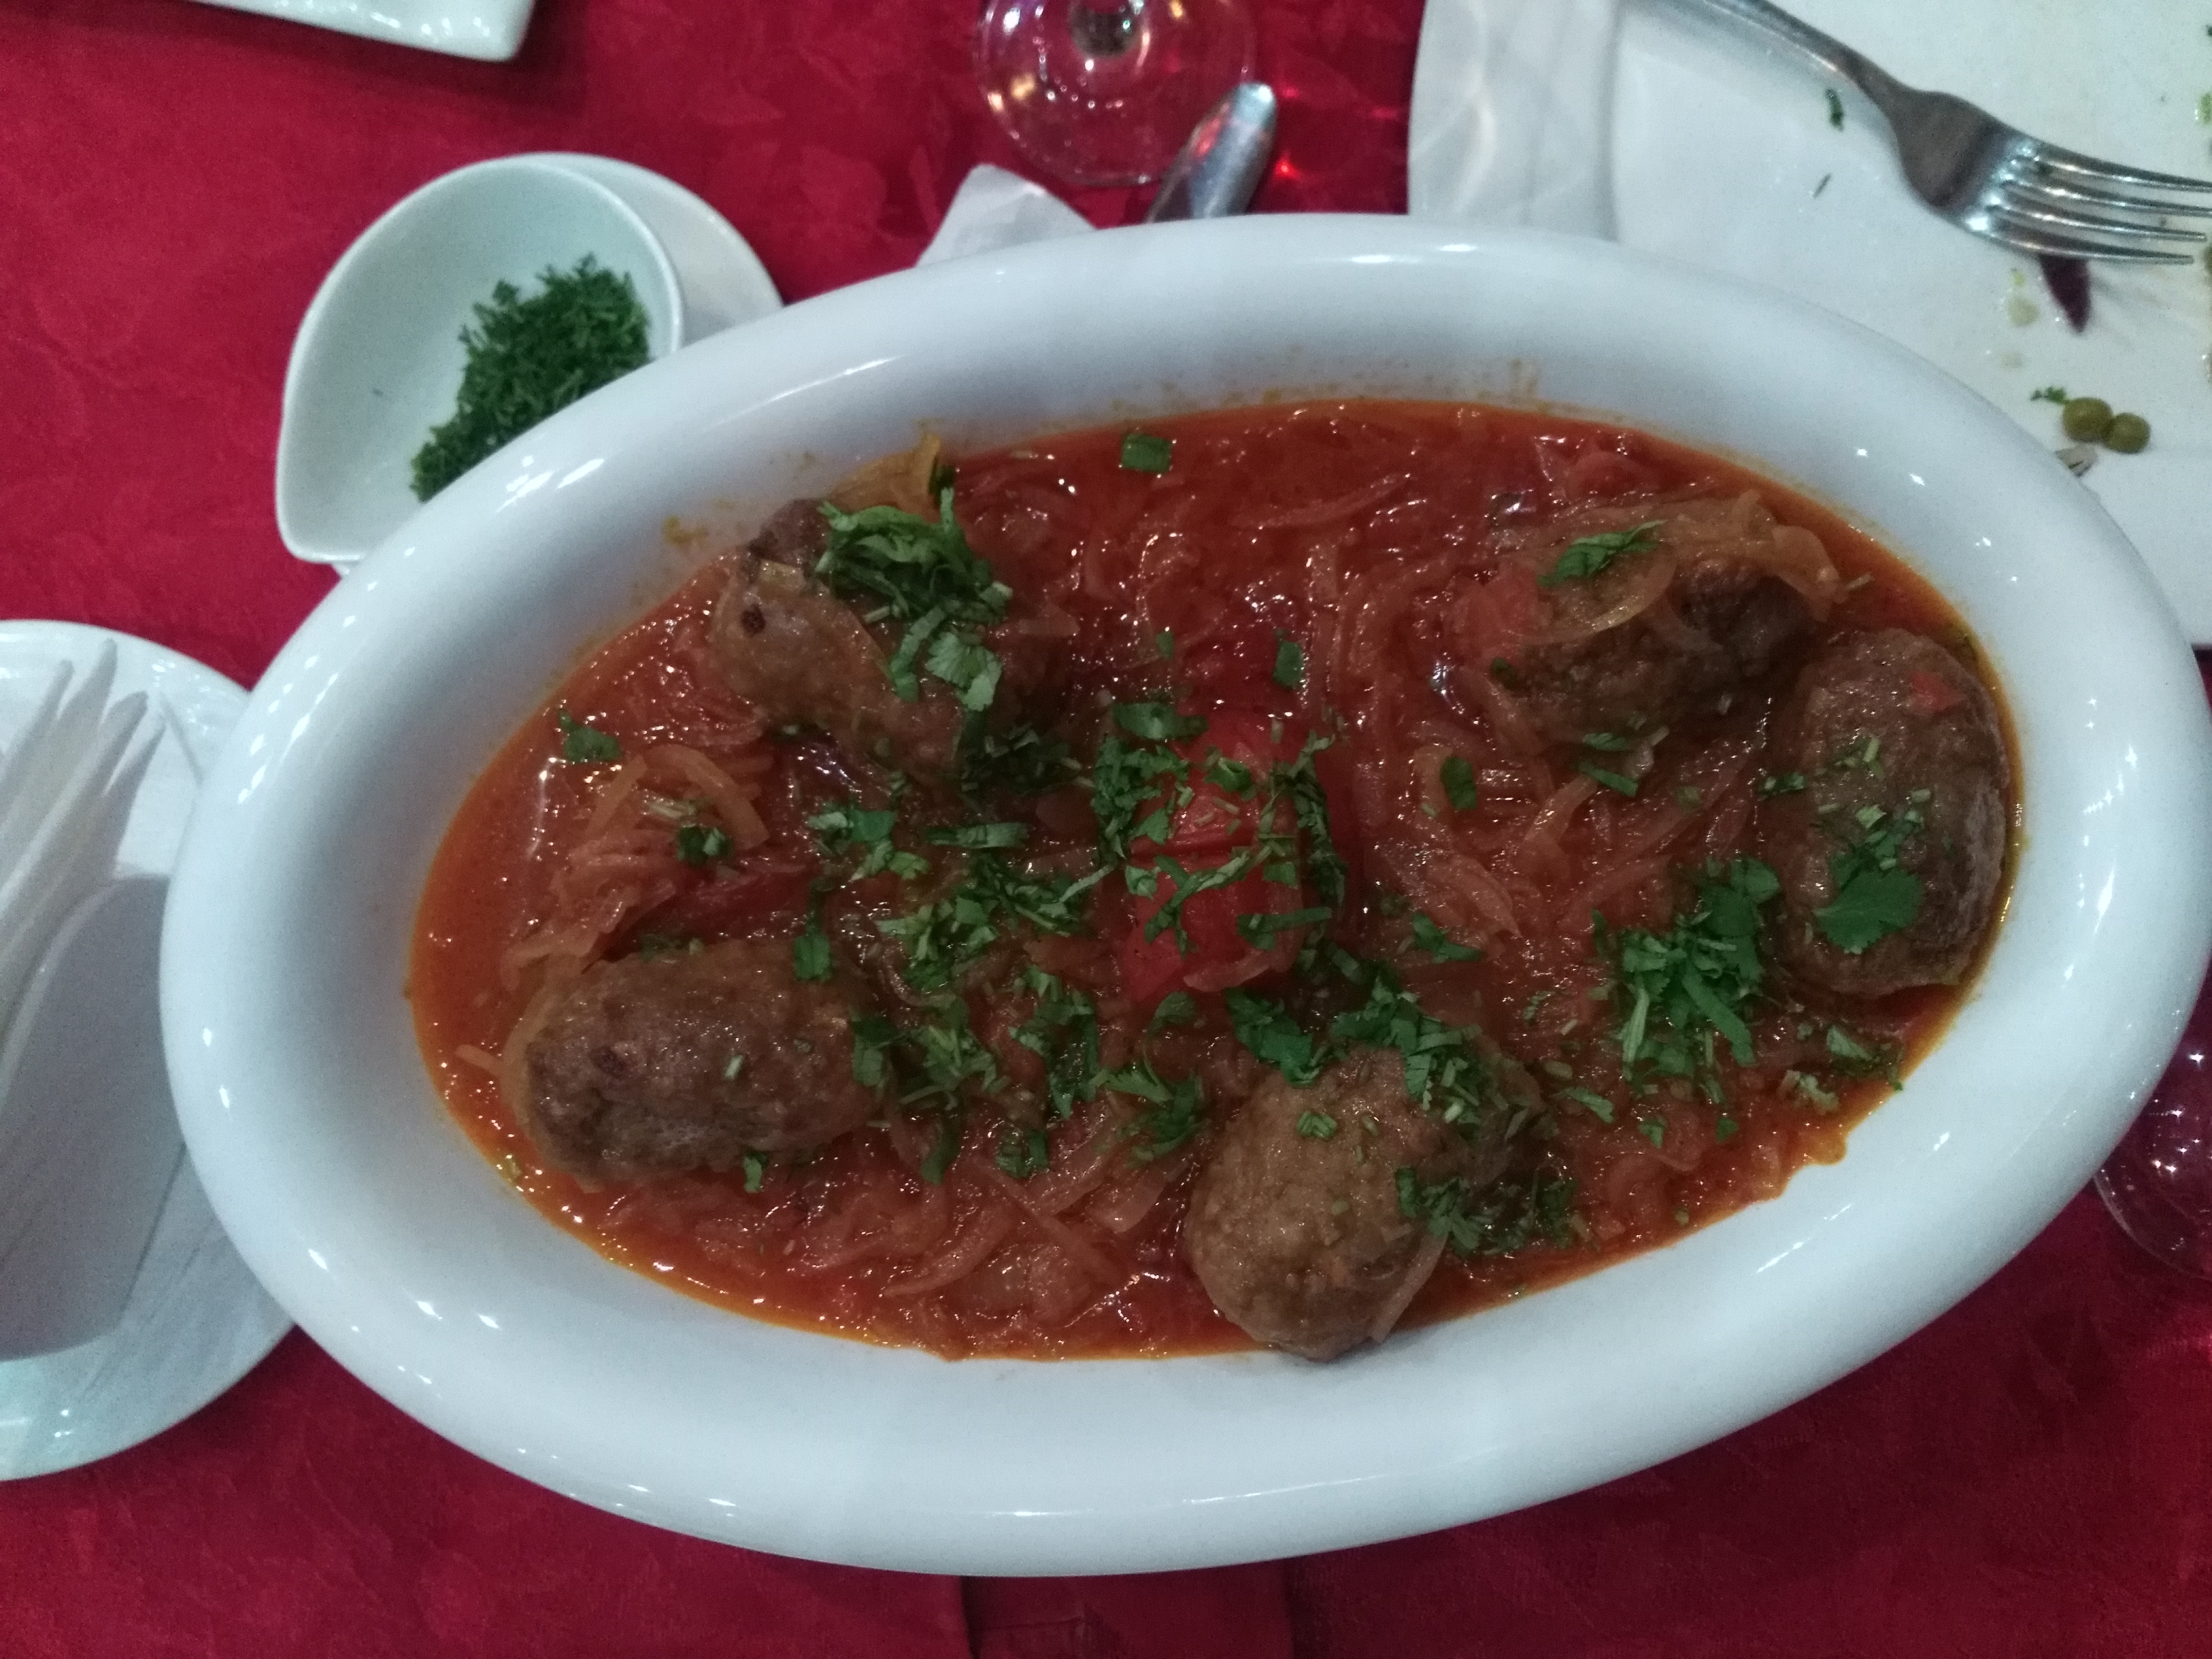 Delicious meatballs (also forgetting the name).